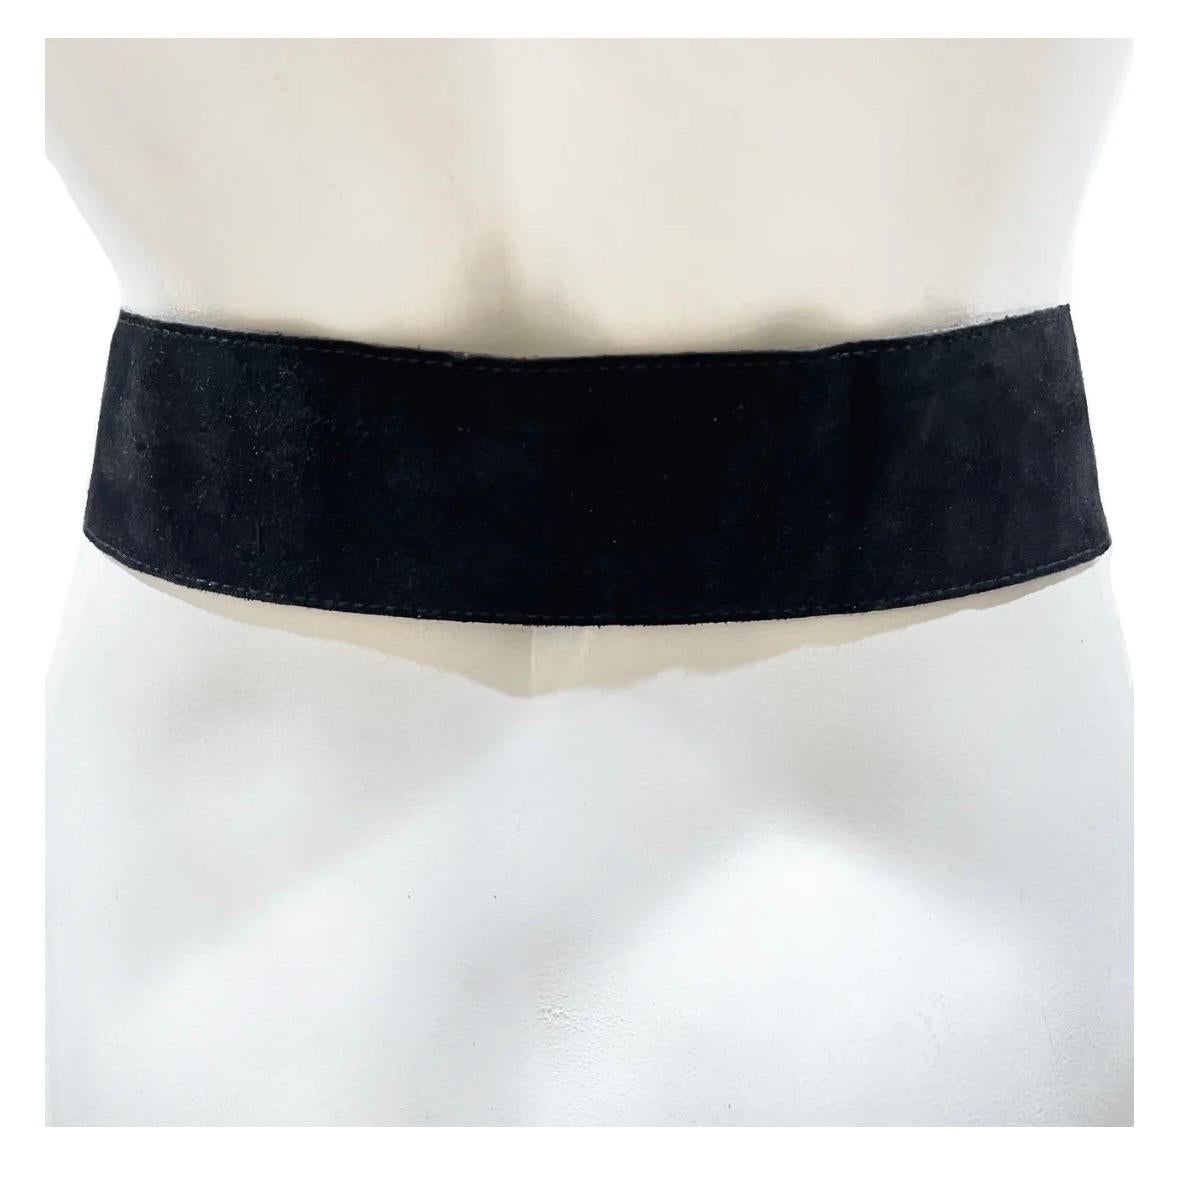 Vintage Yves Saint Laurent Butterly Belt (1970s) In Fair Condition For Sale In Los Angeles, CA